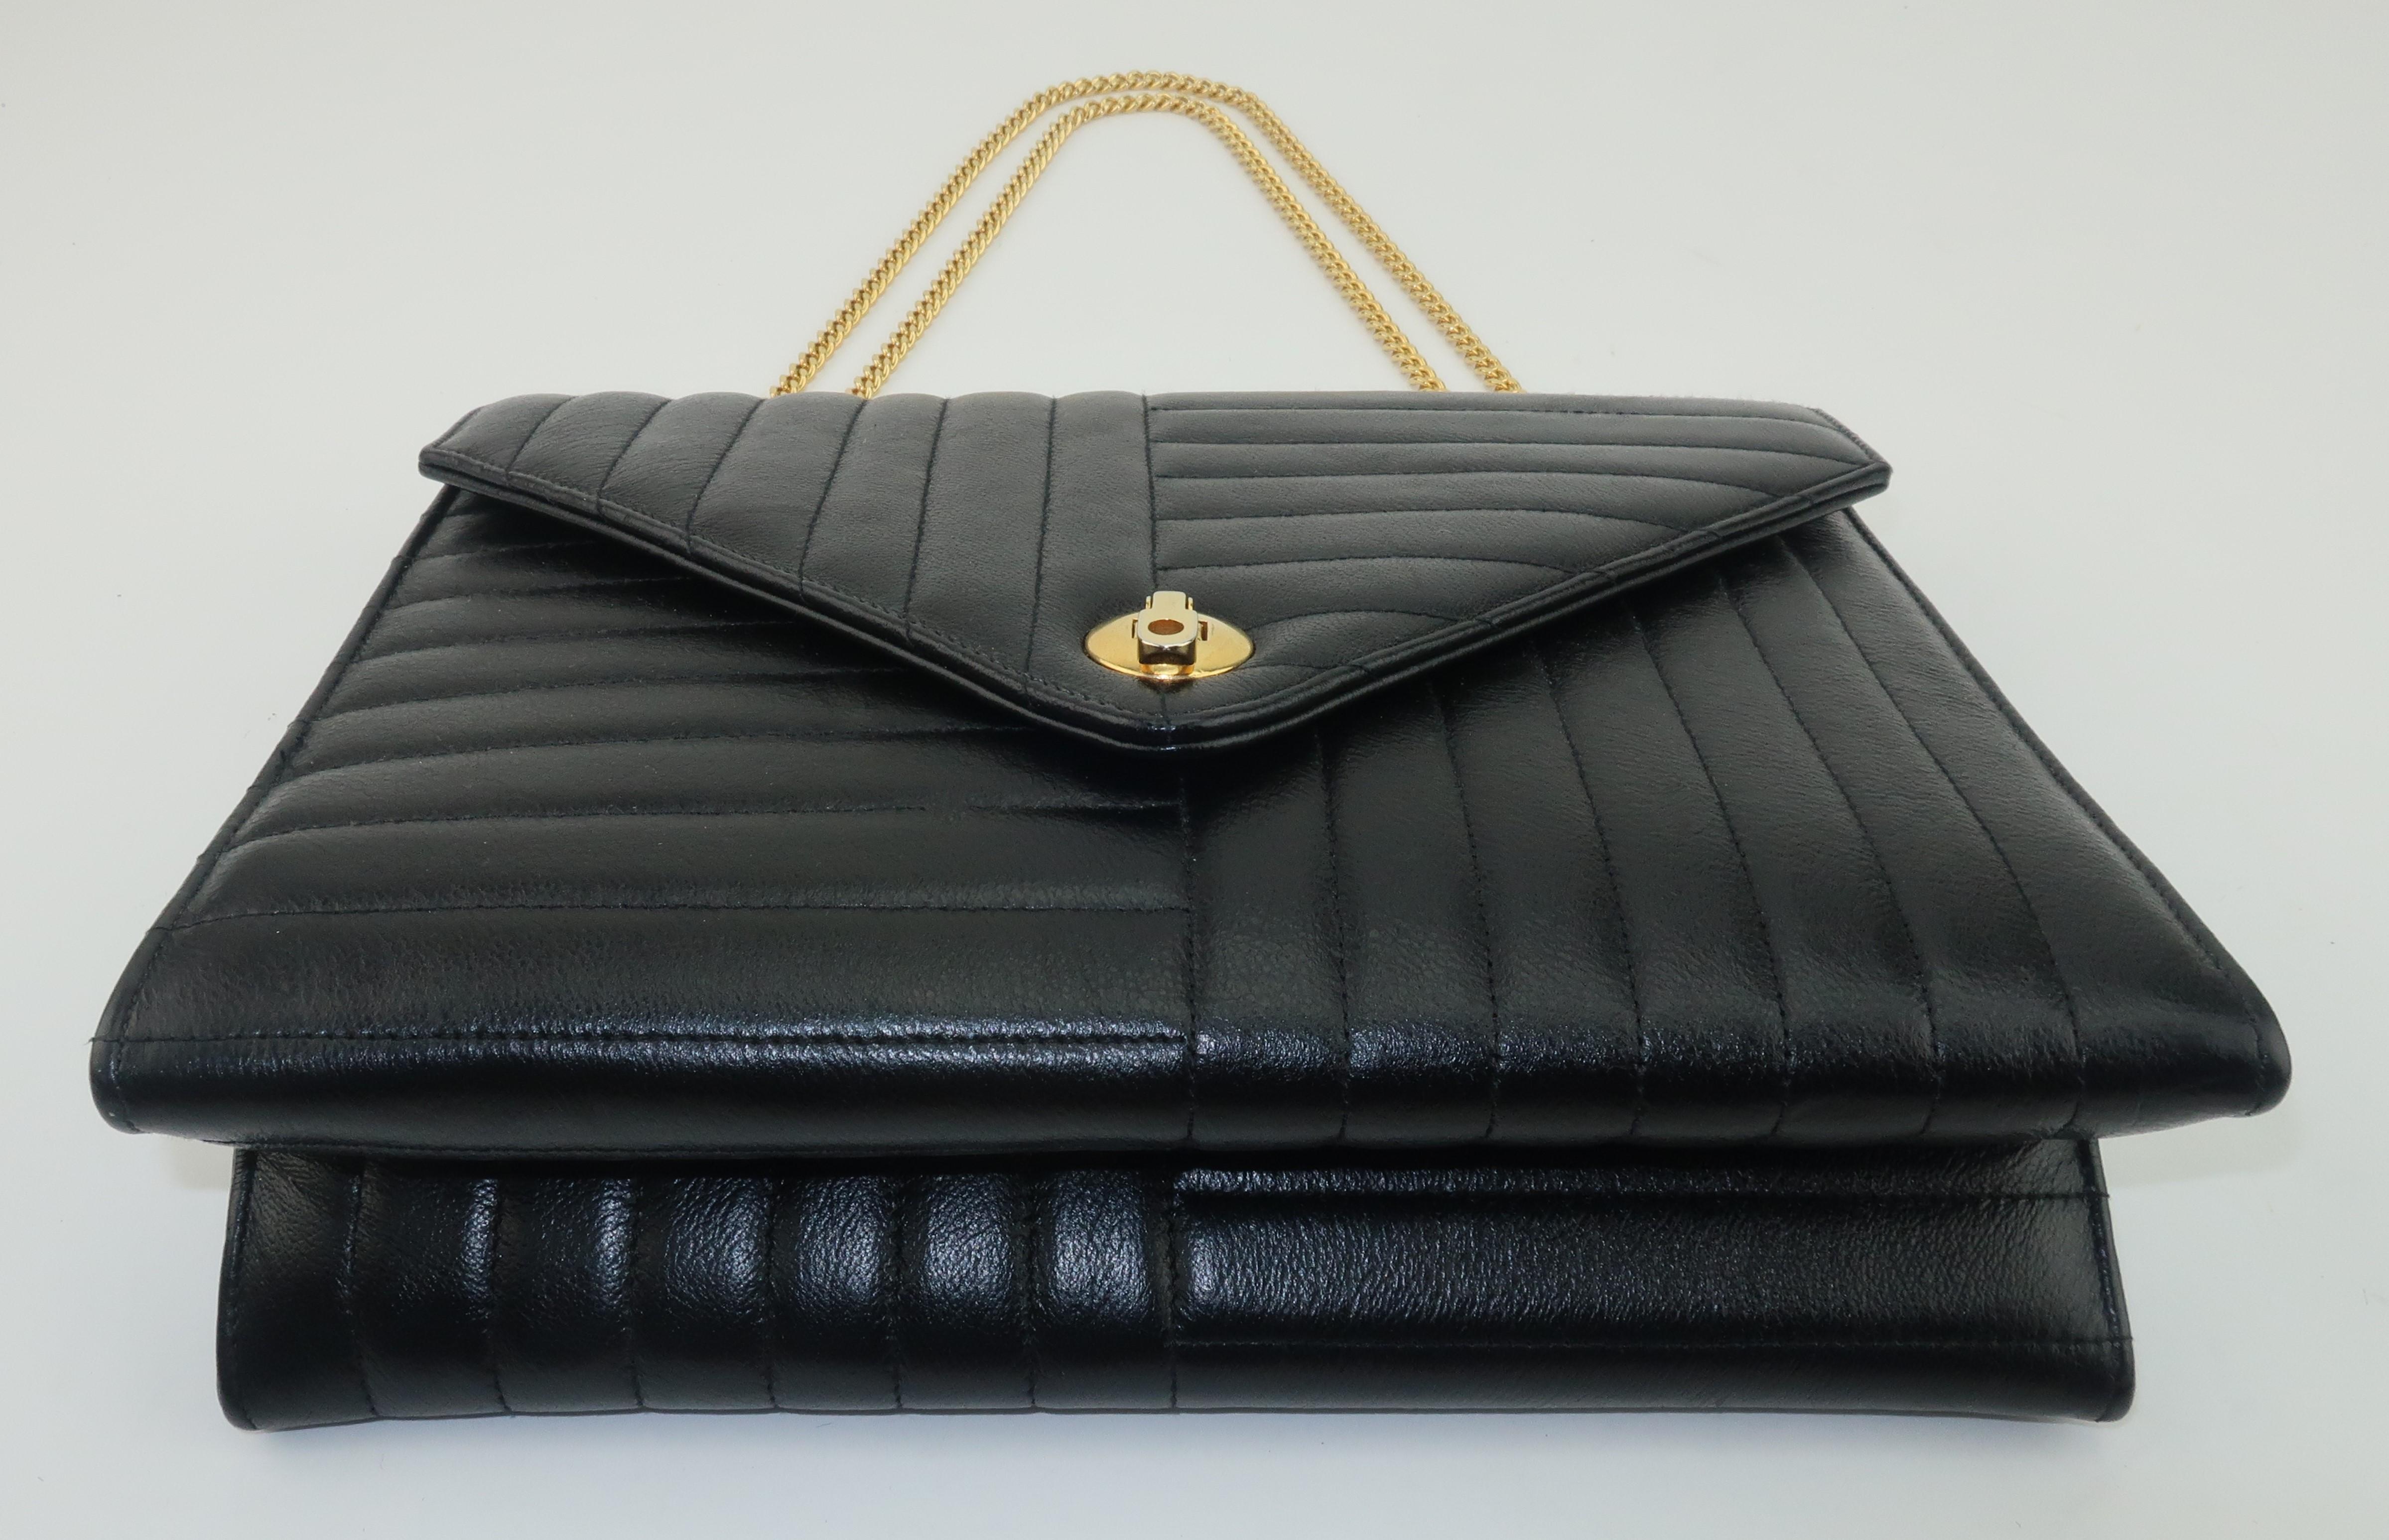 A black leather handbag with a 1960's classicism by Coblentz Originals perfect for a vintage touch to a modern wardrobe.  The body has an envelope style silhouette with a front flap hinged closure and a subtle channeled design that gives a nod to